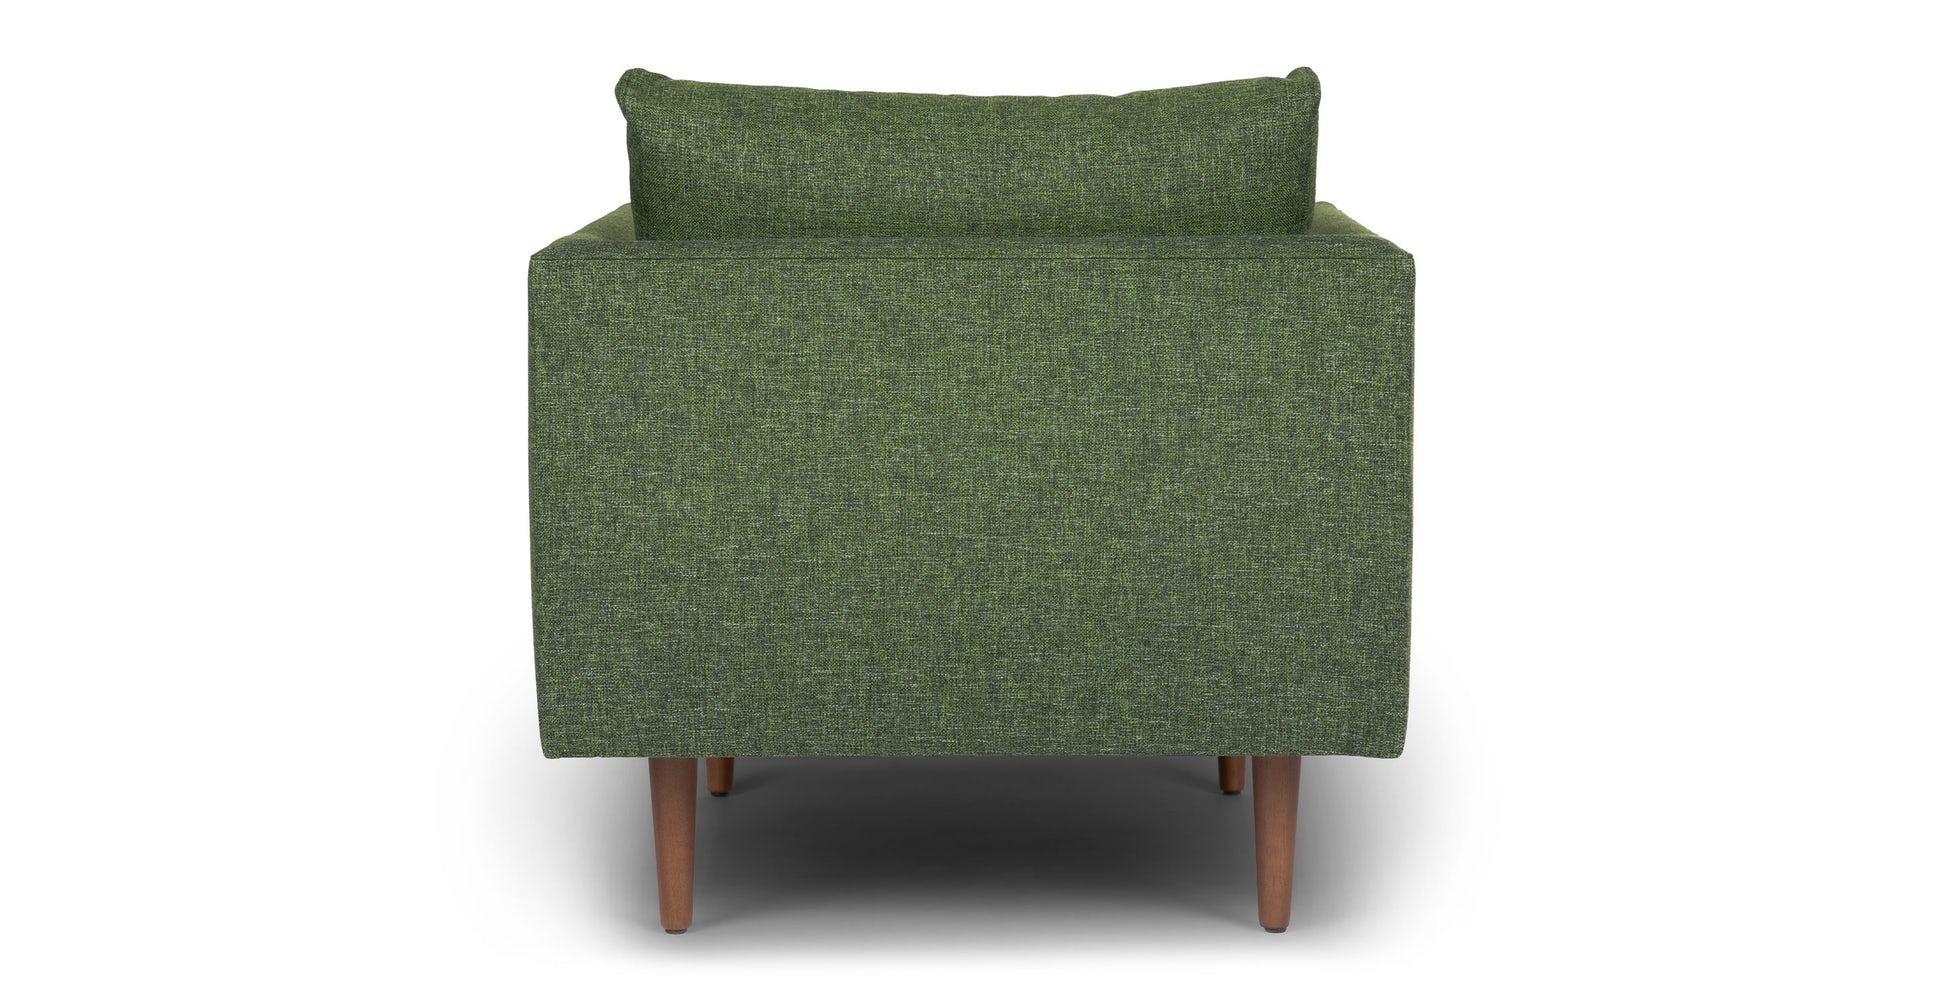 Burrard Forest Green Chair - Image 5